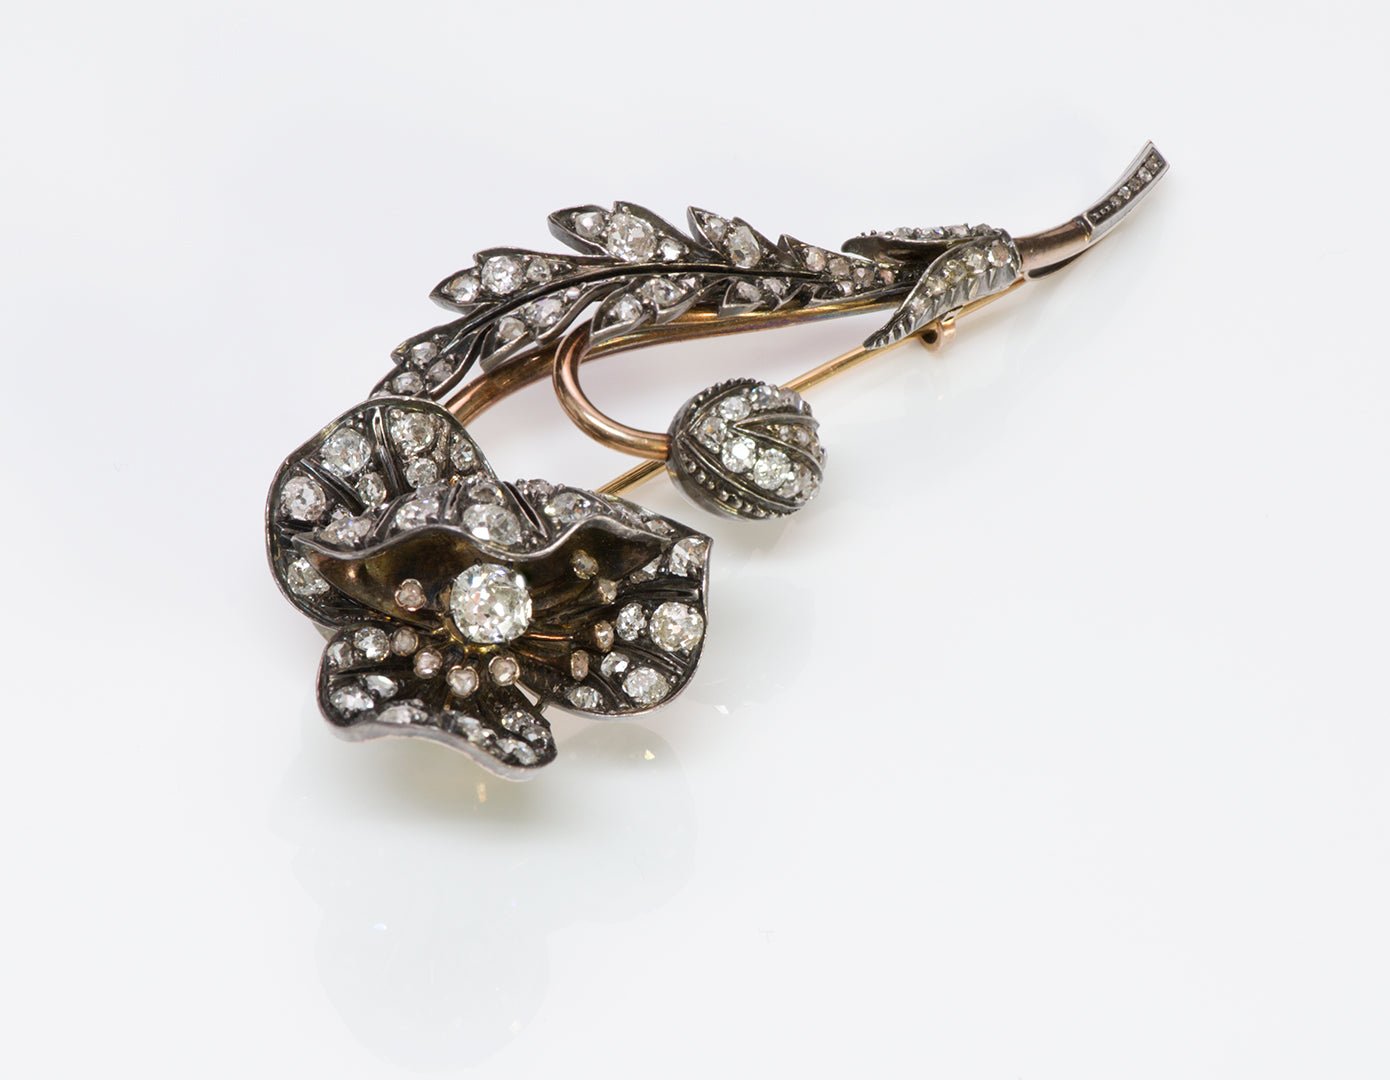 Antique Diamond Tremblant Flower Brooch - DSF Antique Jewelry